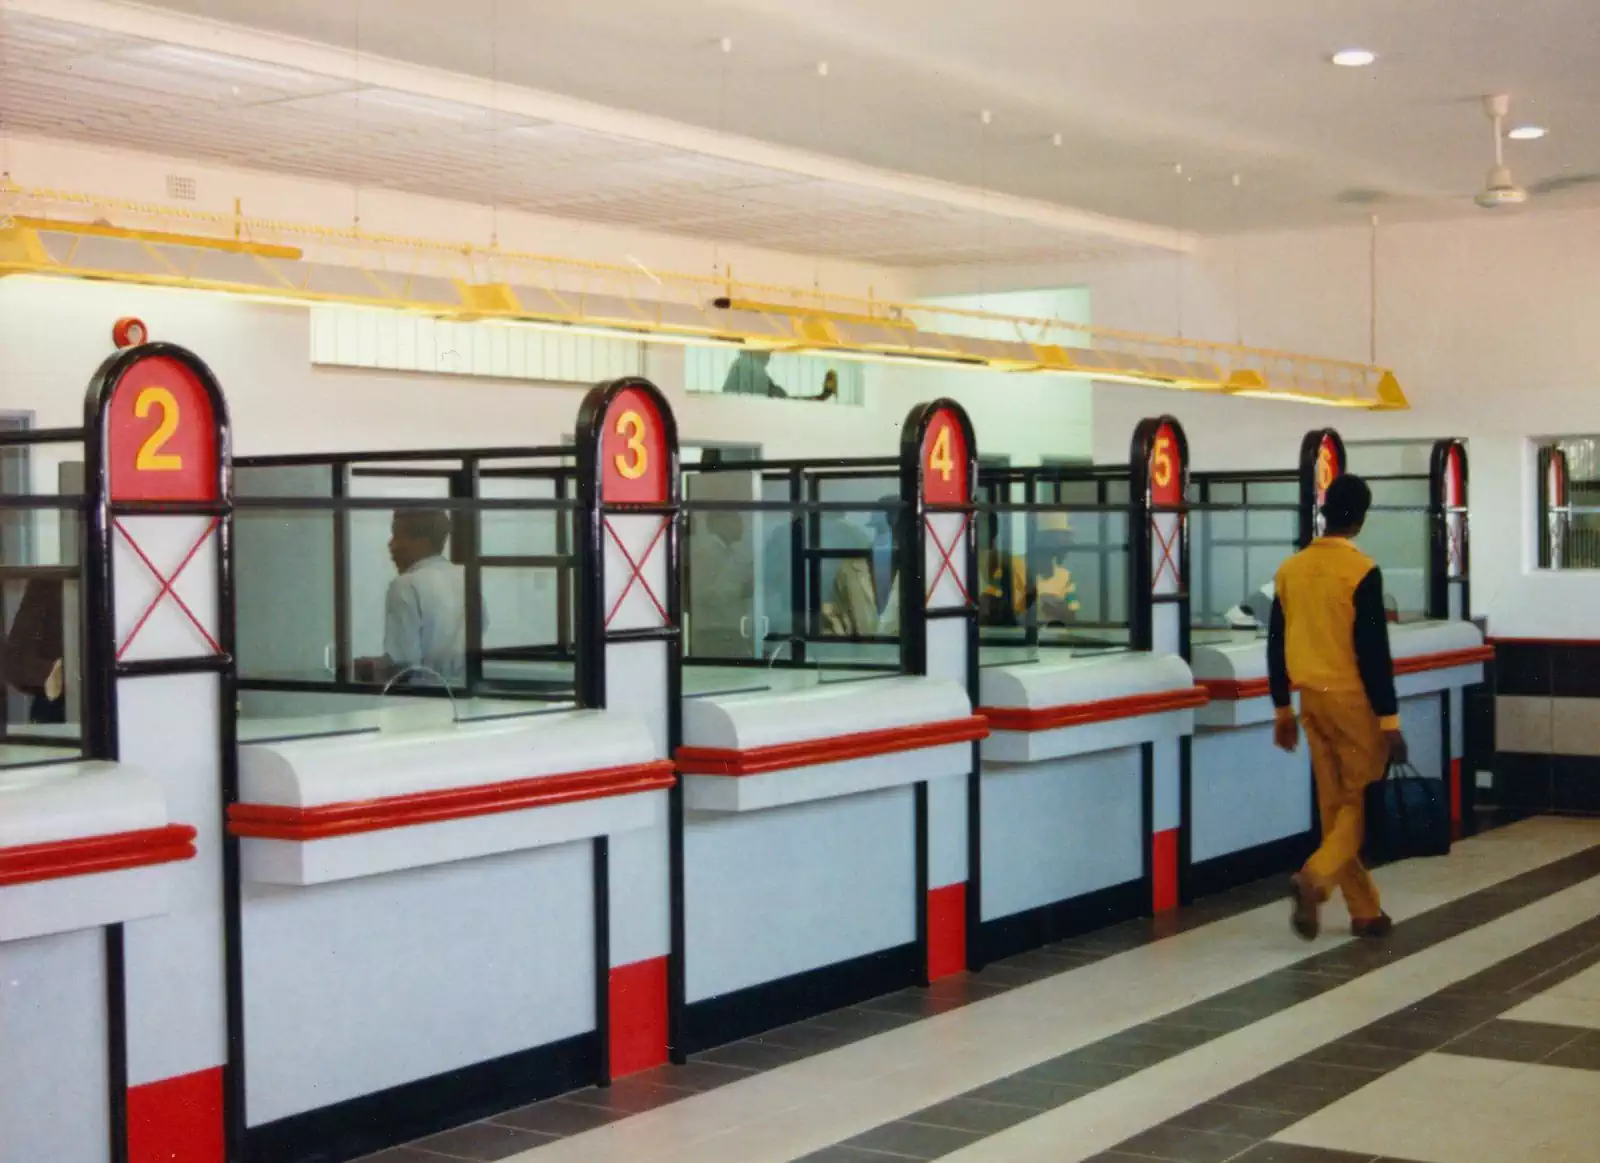 Refurbishment of main post office in Harare. Full interior design of all elements by interior design architect Pantic architects